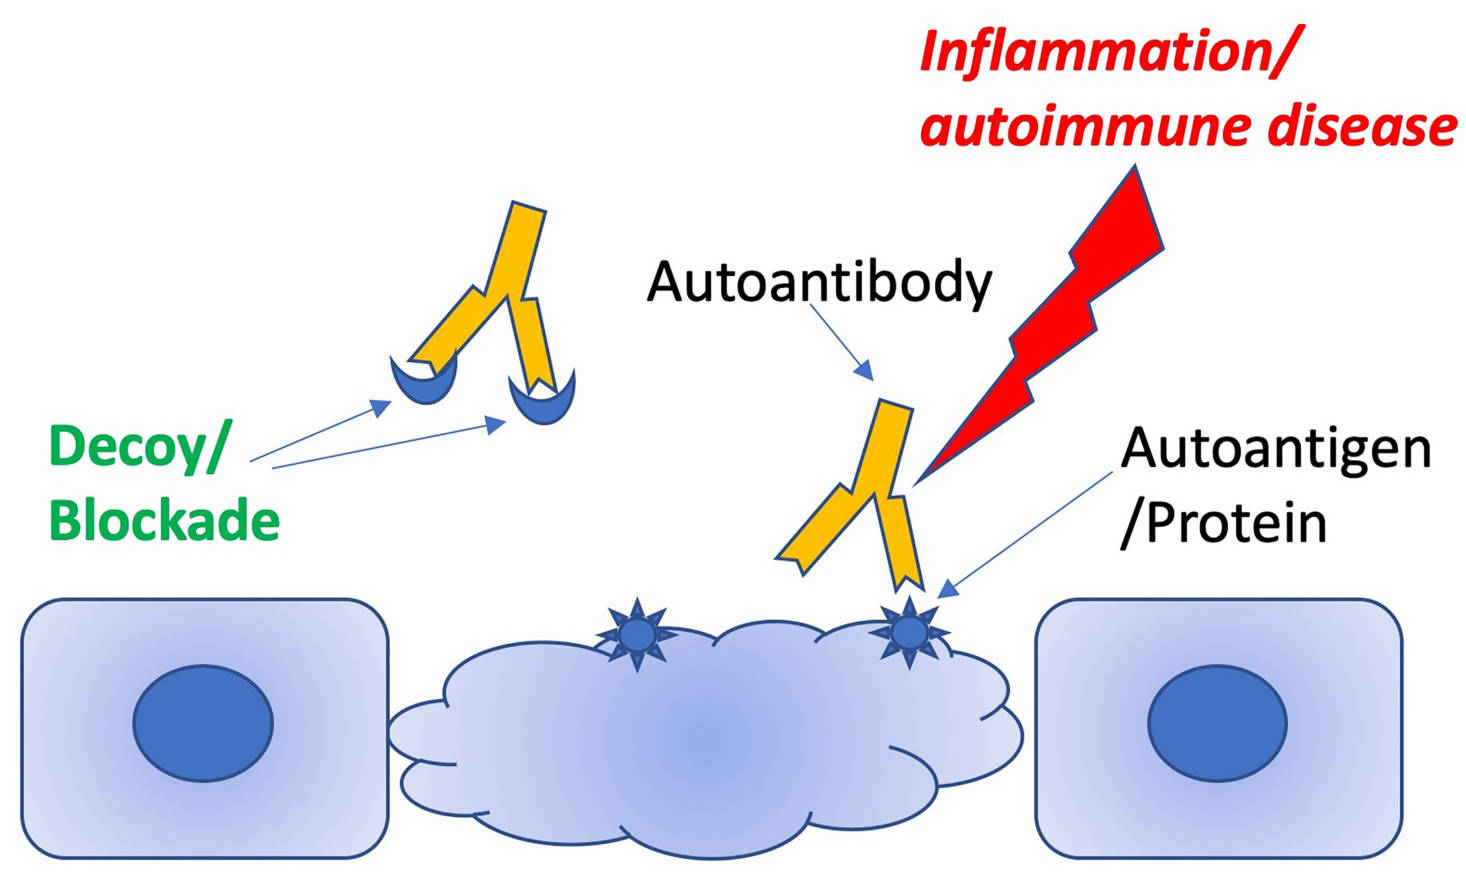 Fig.1 Schematic illustrating how decoy peptides can distract pathogenic antibodies from targeting autoantigens. (Cardozo, et al., 2022)